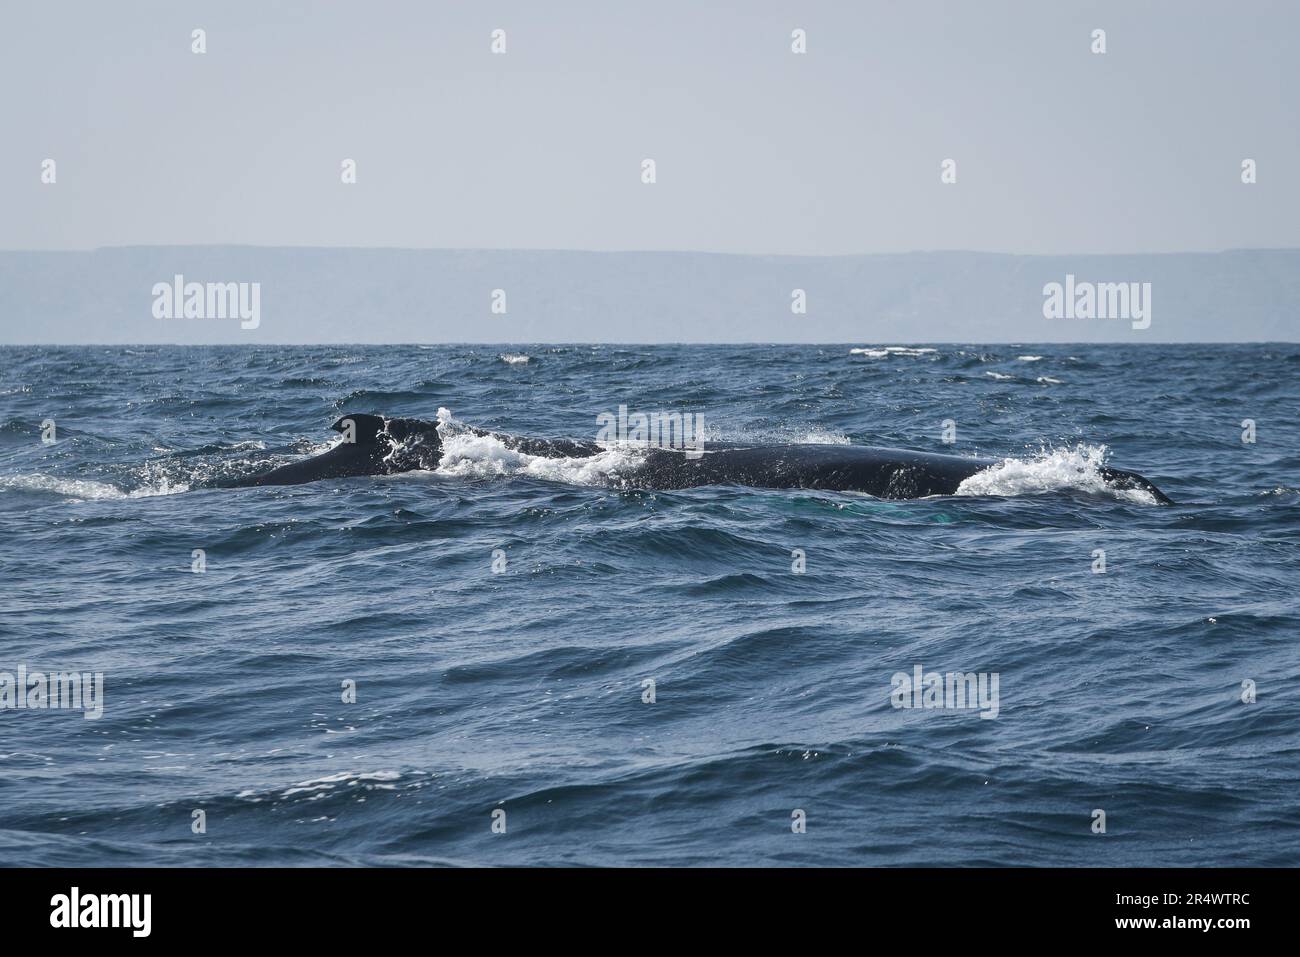 Nicolas Remene / Le Pictorium -  El Nino phenomenon on the north coast of Peru  -  21/10/2018  -  Peru / Piura / ? Mancora / Talara ?  -  Whales at Los Organos in the Talara region, on Peru's northwest coast, October 21, 2018. Whales and other cetaceans are vulnerable species because they are sensitive to threats linked to human activities and certain natural phenomena such as El Nino.                 Los Organos is one of the fishing villages affected by the El Nino phenomenon.                           ---------------------------------------- El Nino phenomenon on the north coast of Peru Nor Stock Photo